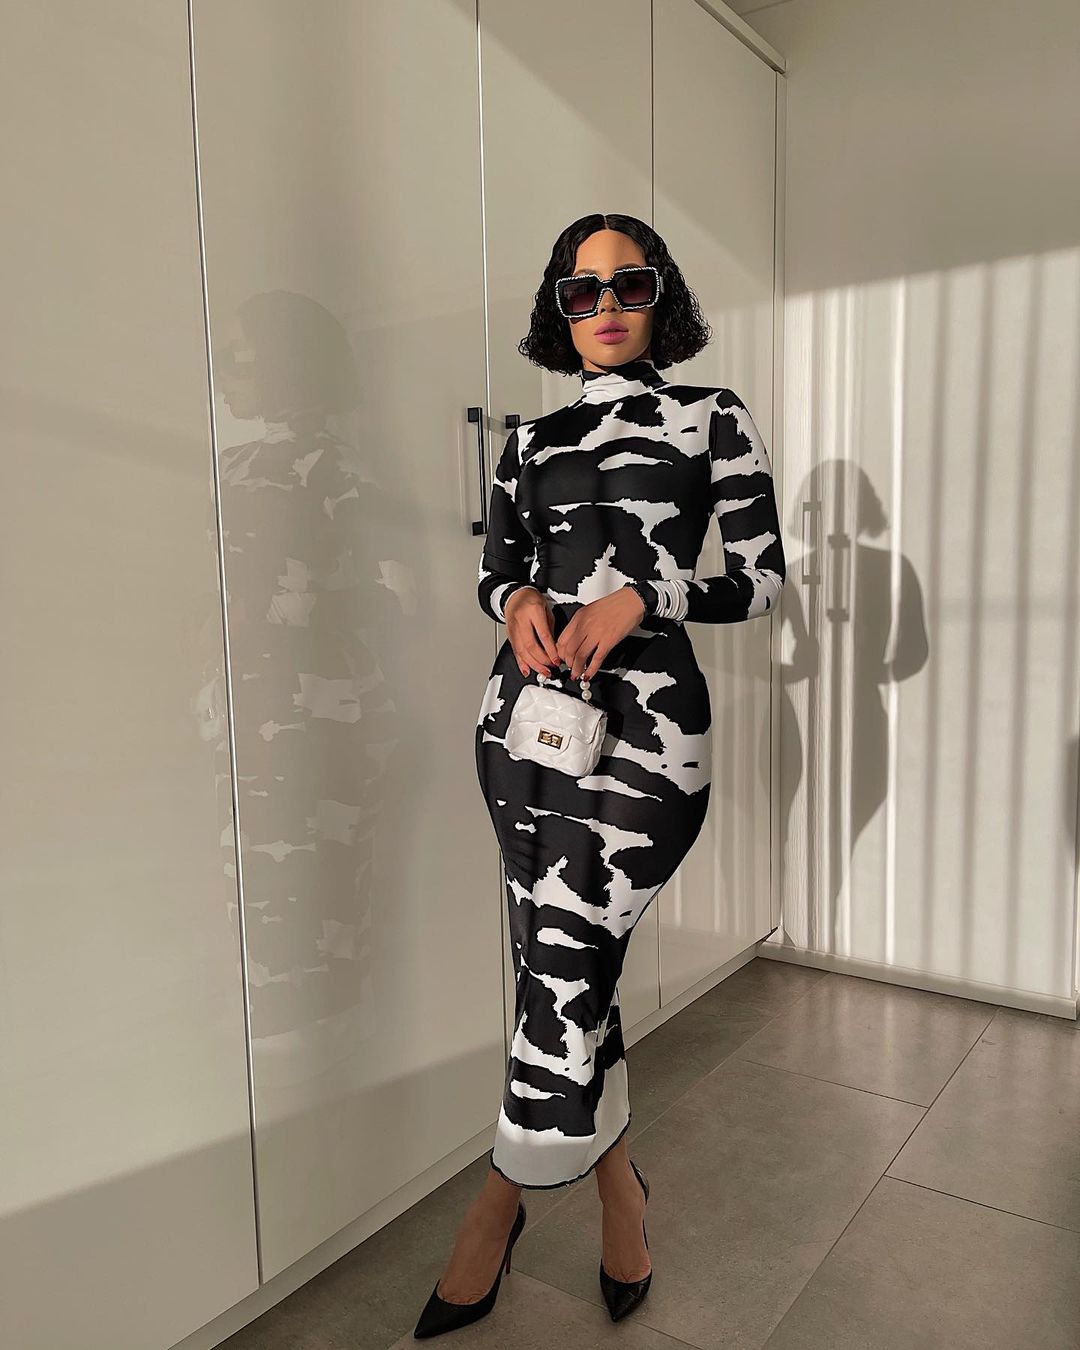 last-week-our-best-dressed-favorite-african-celebrities-and-divas-served-bawdy-full-on